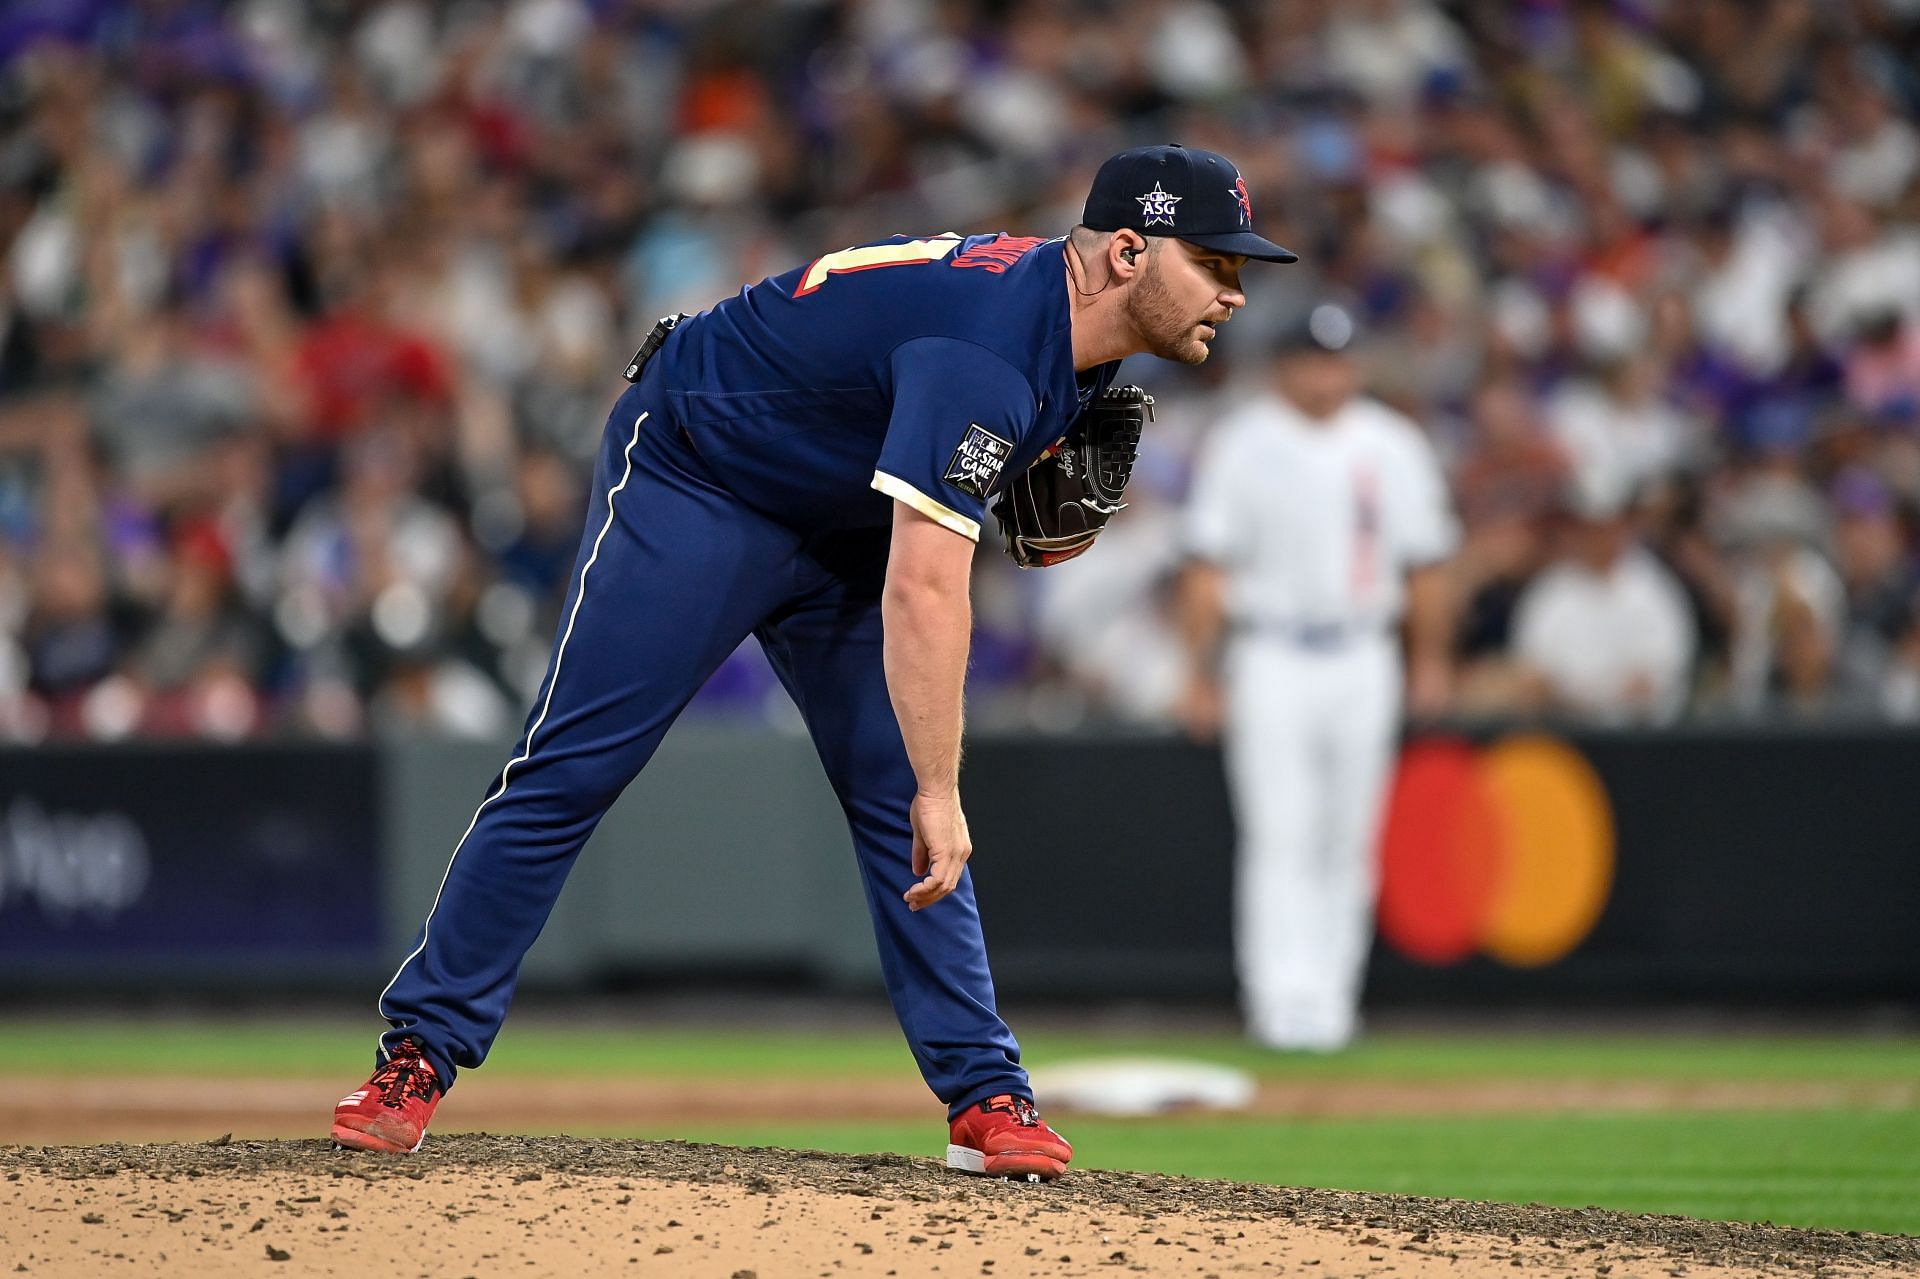 Ranking MLB top closers going into the 2022 season